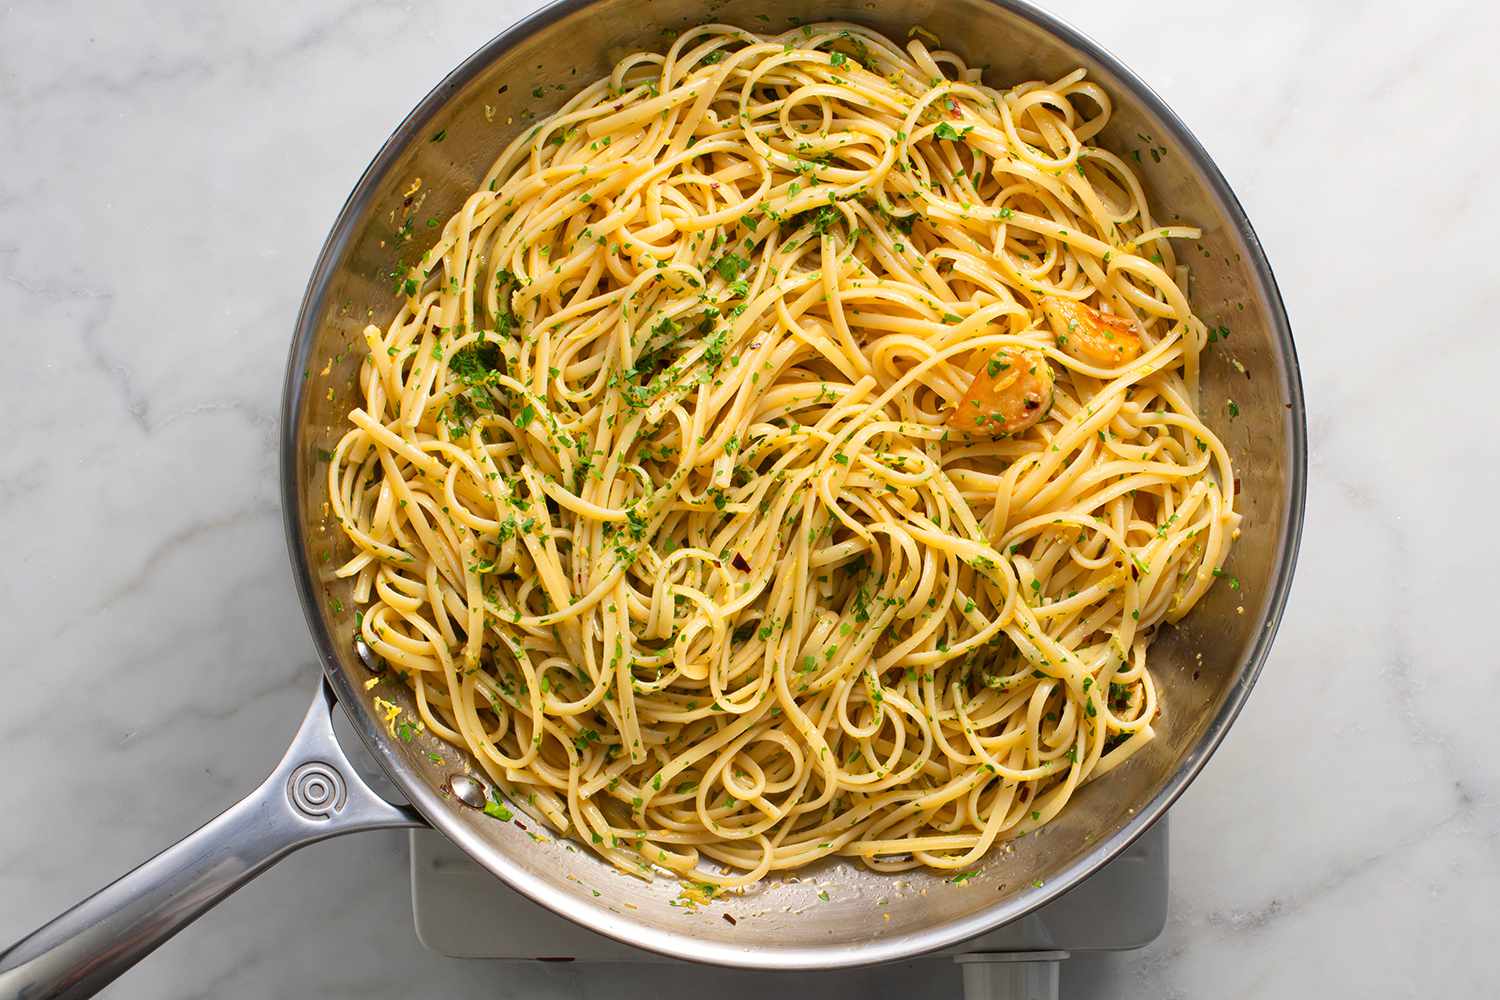 Parsley, the lemon zest, and juice added to the pasta in the pan, on a burner 